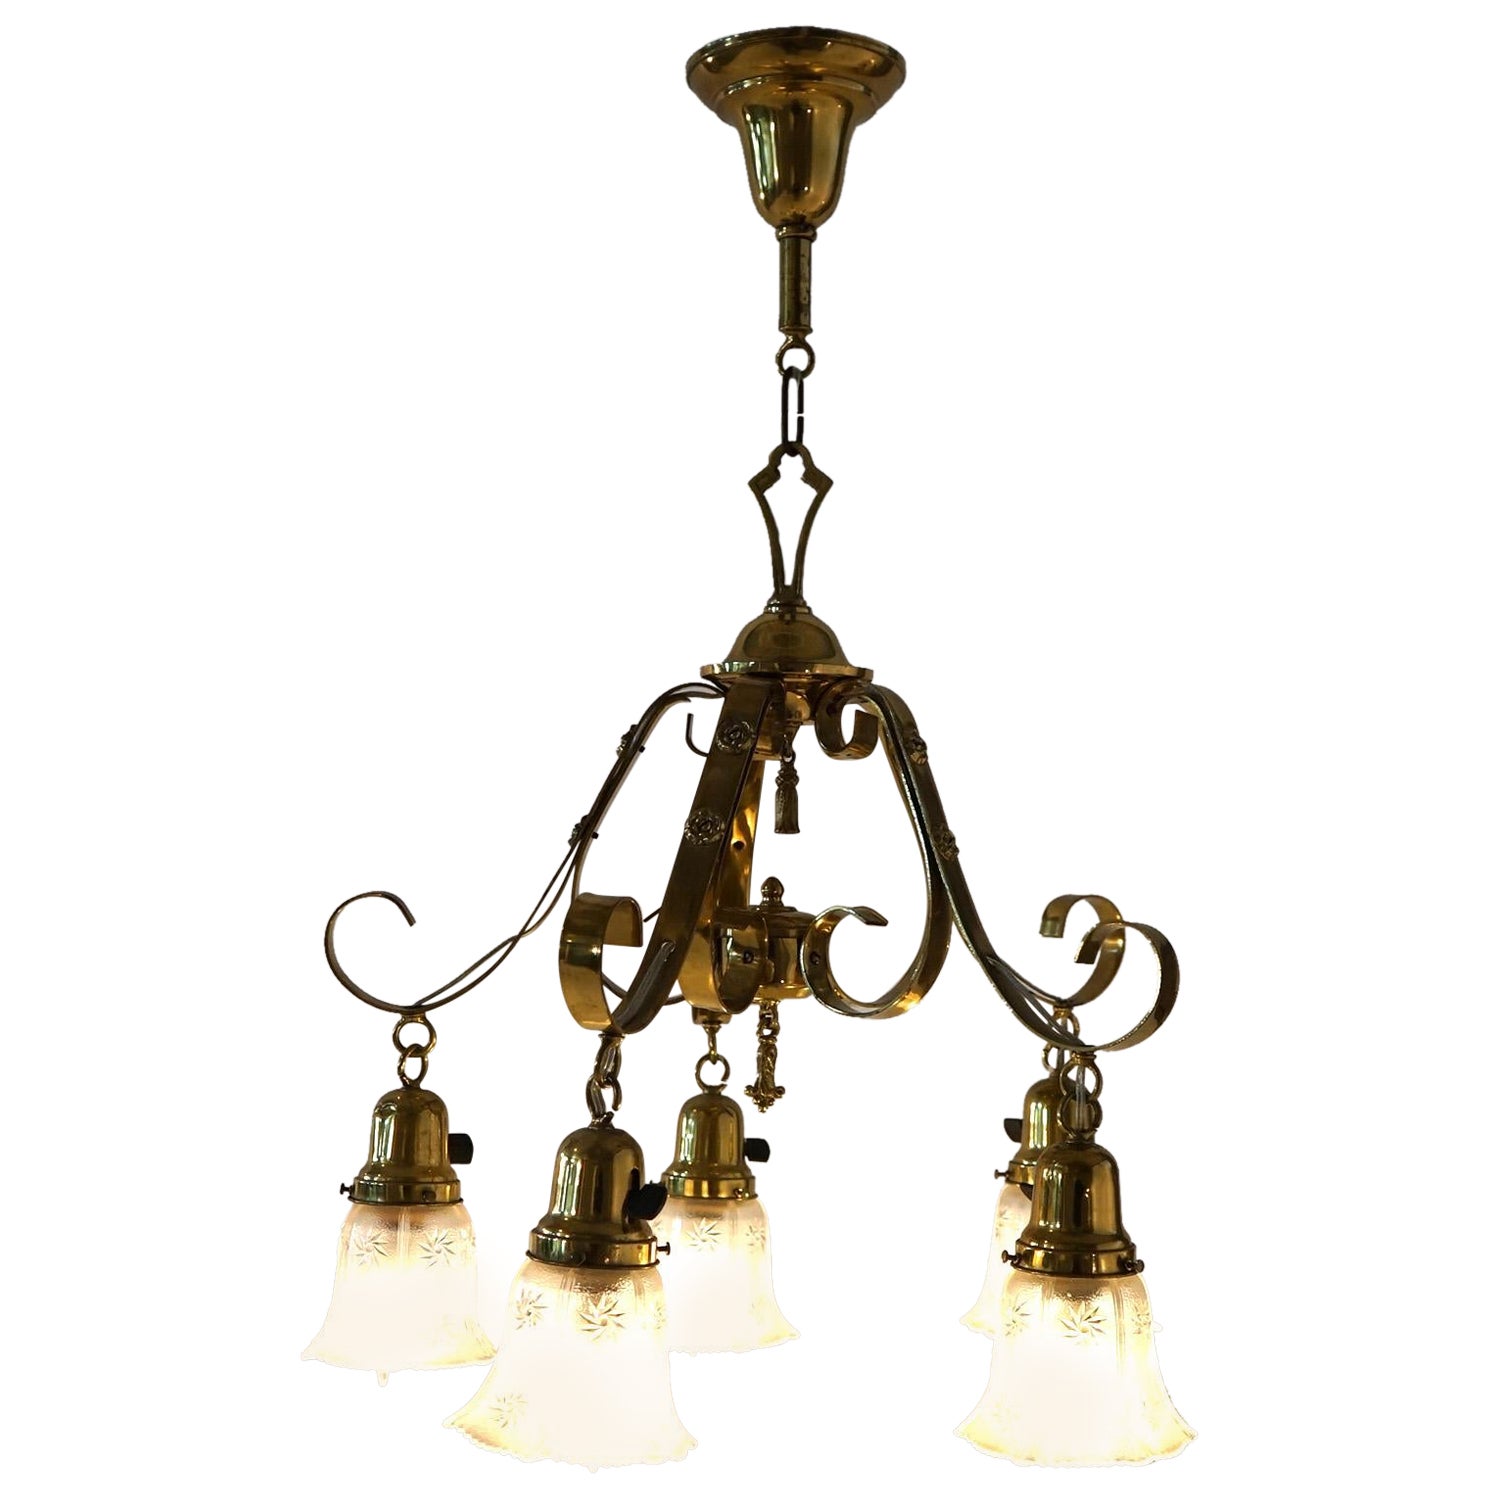 Antique Arts & Crafts Gilt Metal & Brass Hanging Fixture, Embossed Shades c1920 For Sale